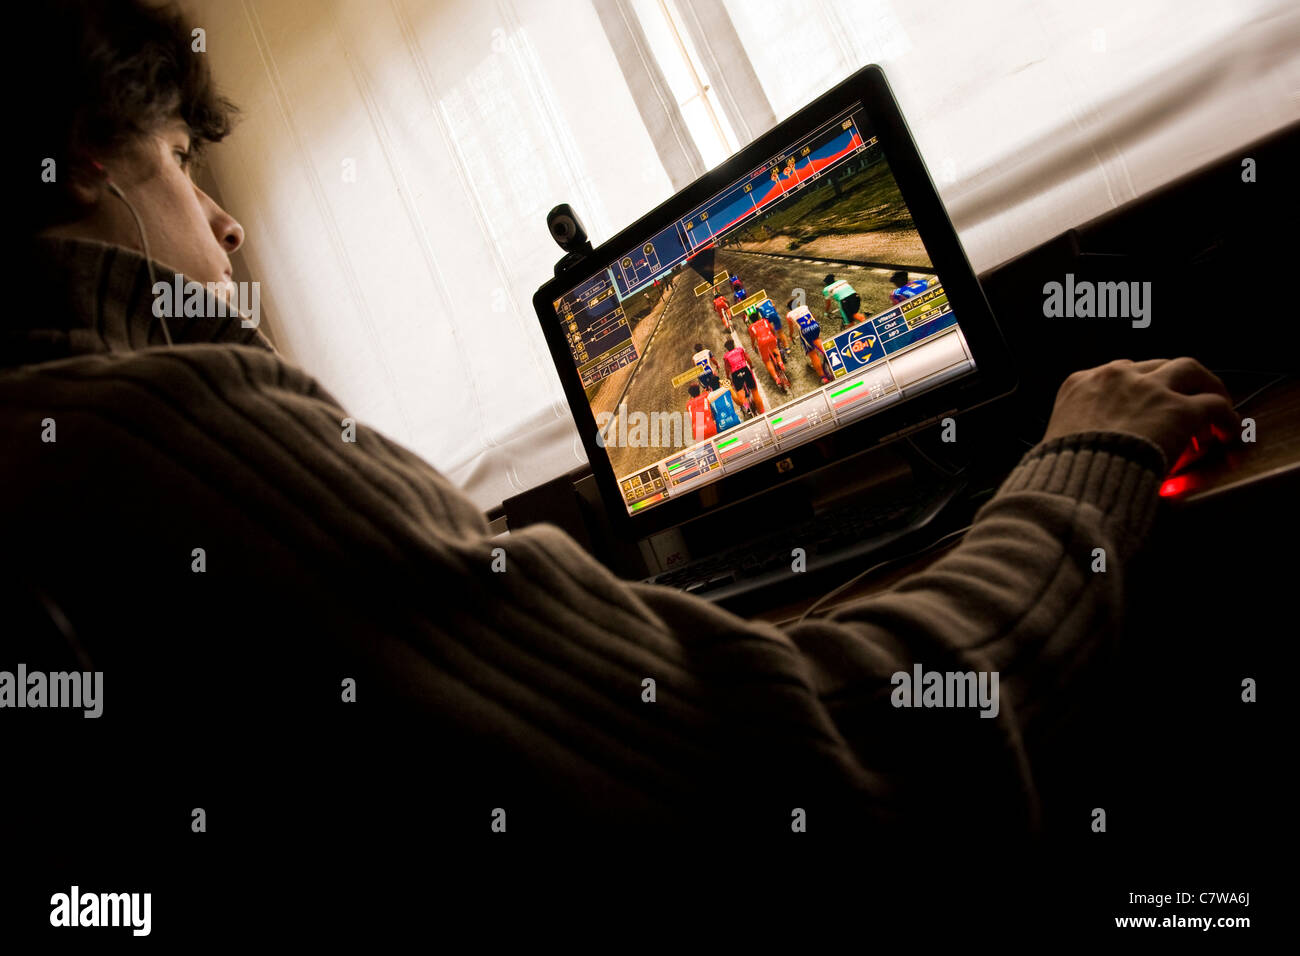 Man playing video game on computer home Stock Photo